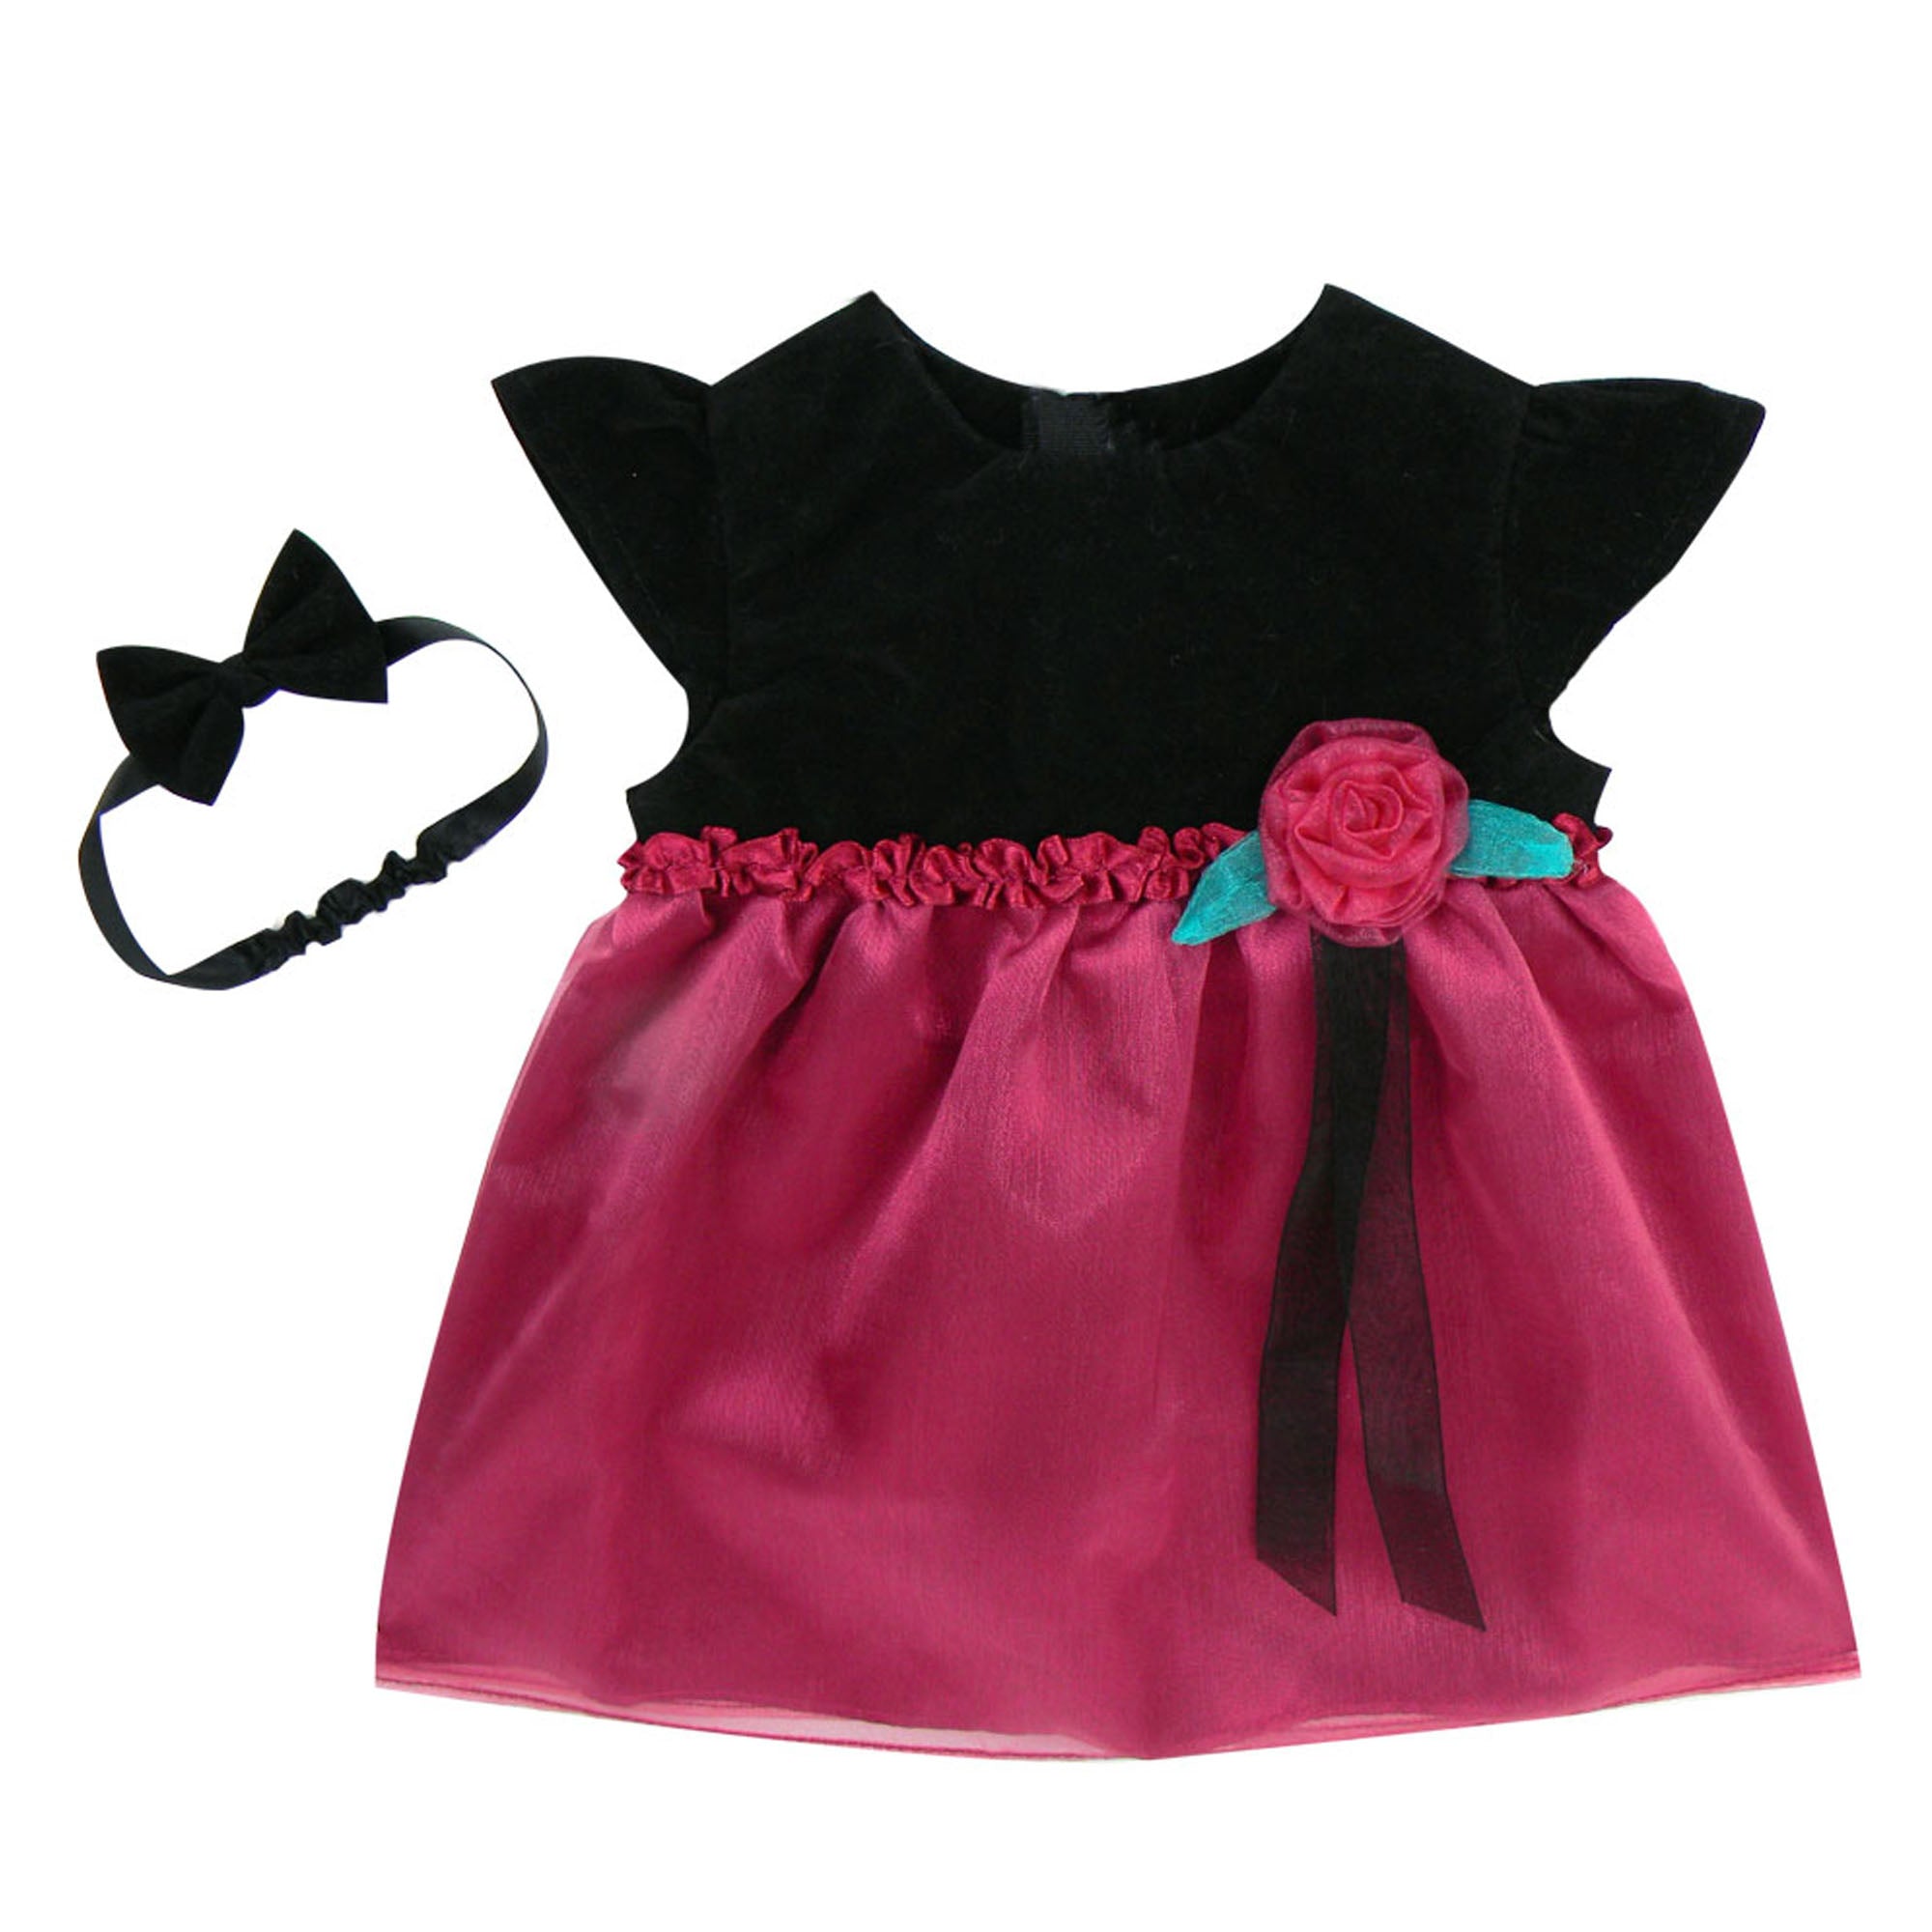 Sophia’s Velvet & Satin Special Occasion Holiday Dress with Matching Bow Headband Accessory & Rosette Detail for 15” Baby Dolls, Black/Berry